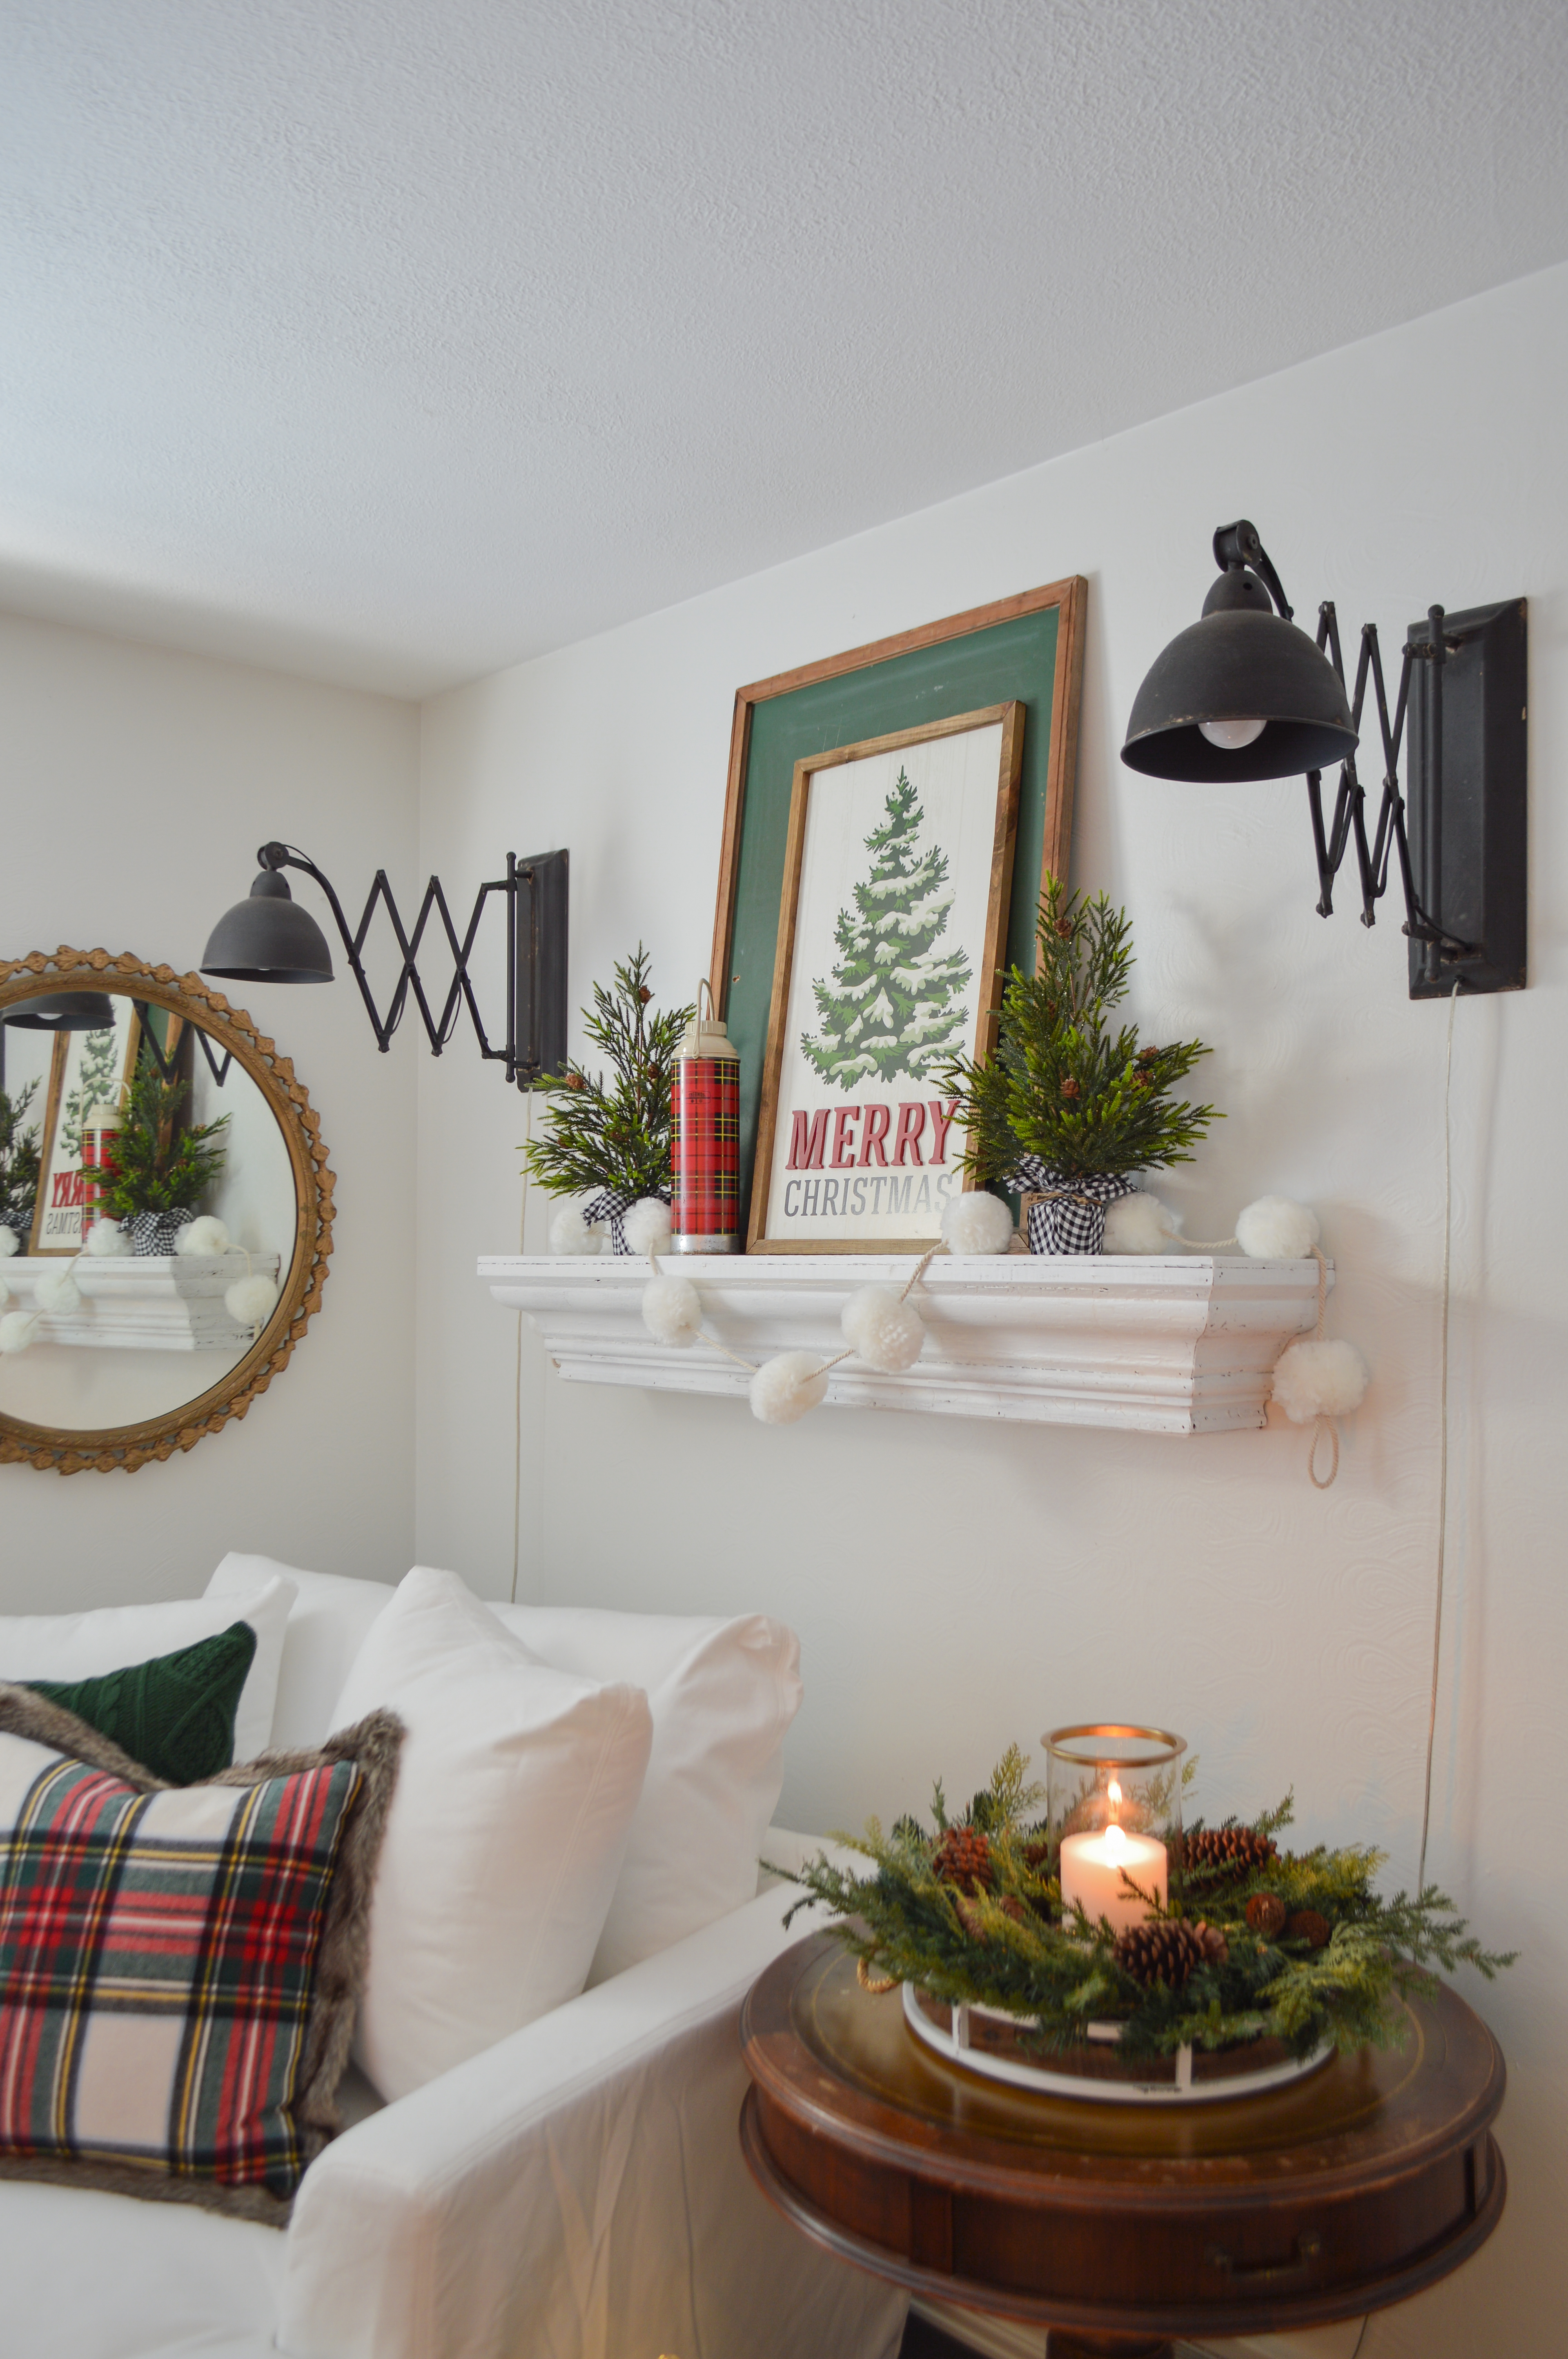 Holiday Housewalk Merry Christmas Home Tour - Cozy little 1920's cottage home decorated for Christmastime - full of affordable, easy ideas, vintage finds and DIY projects! #holidayhousewalk #christmashometour #cozychristmas #cottagechristmas #farmhousechristmas